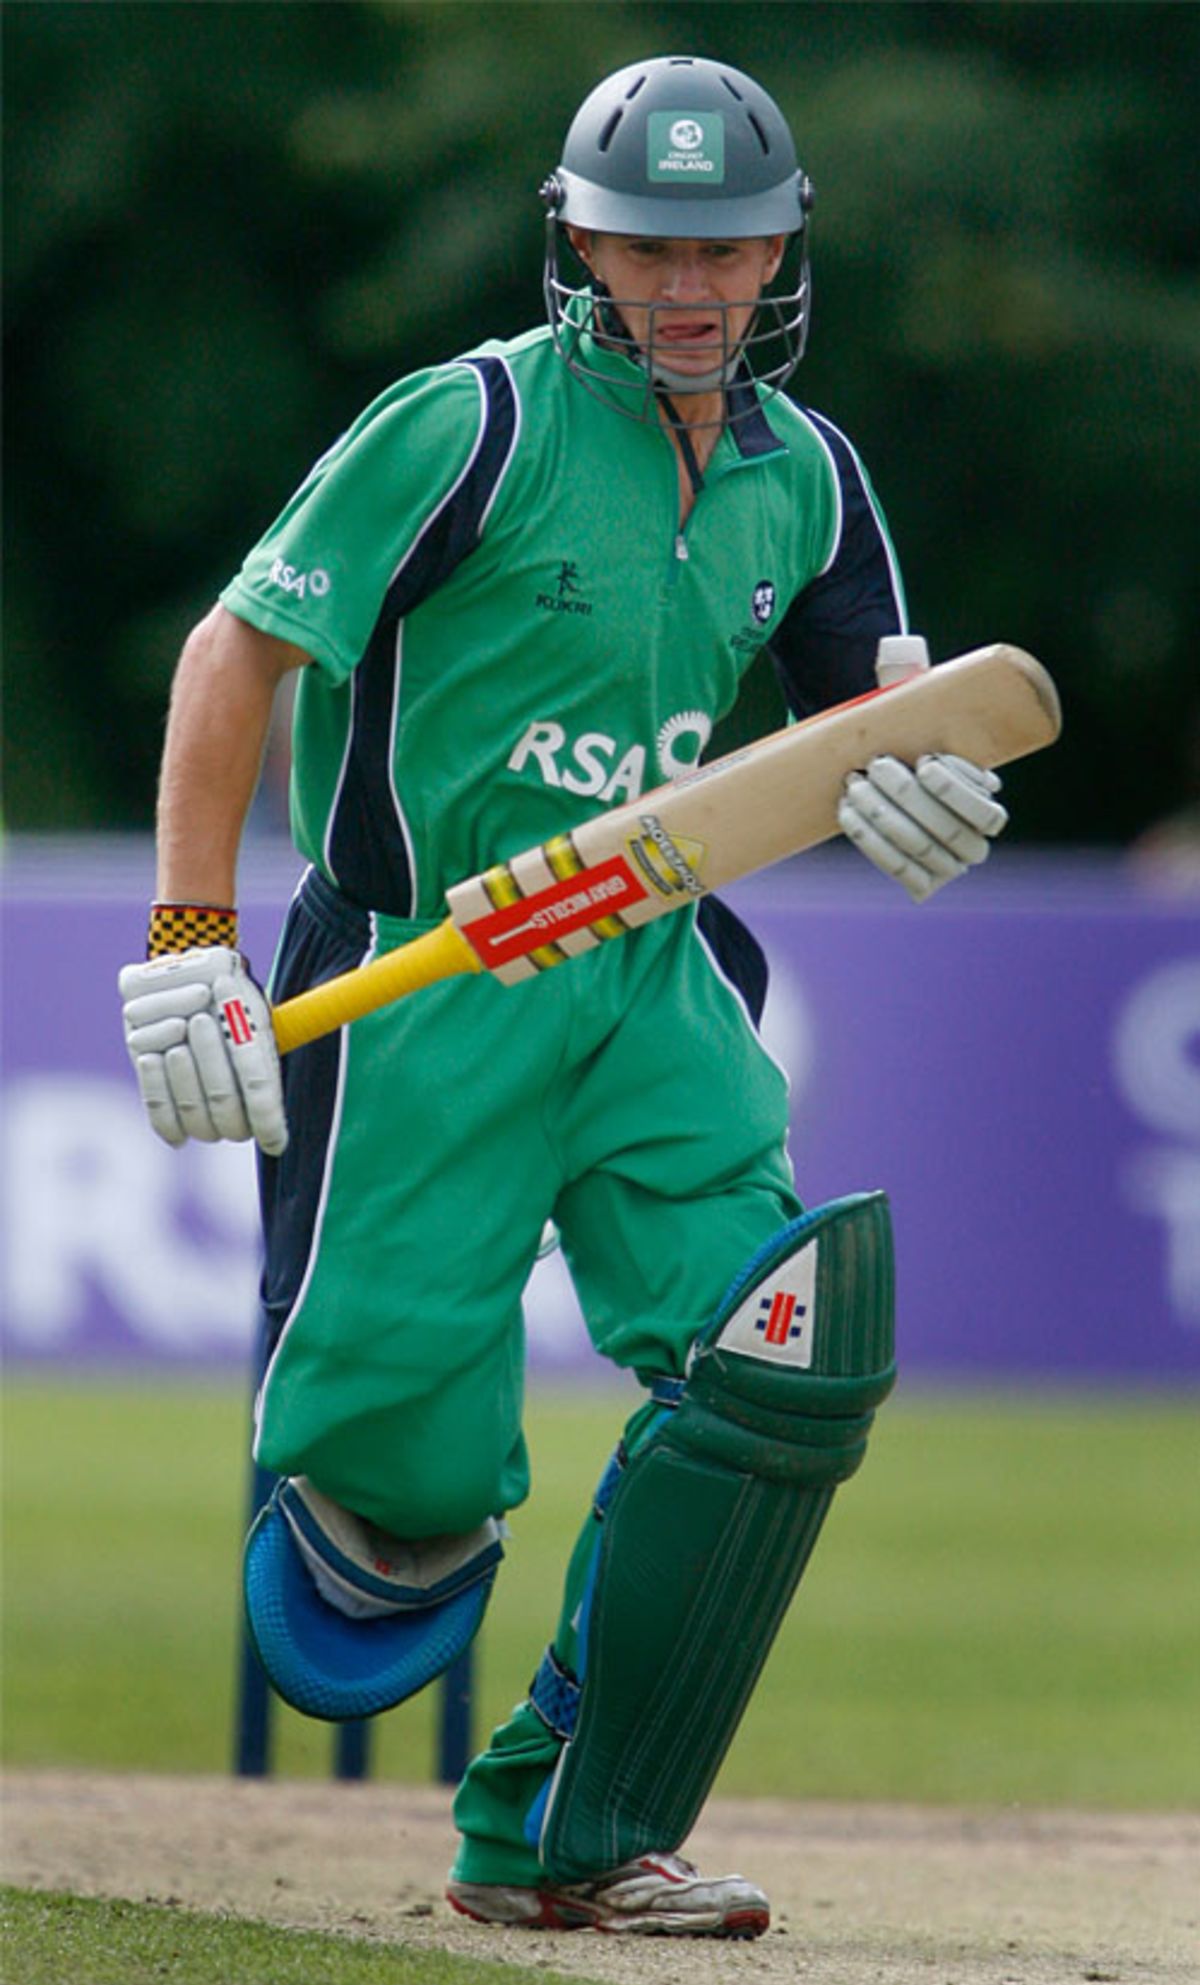 William Porterfield failed to reach double figures, as did everyone else in the match, Ireland v Bermuda, ICC World Twenty20 Qualifiers, Belfast, August 3, 2008